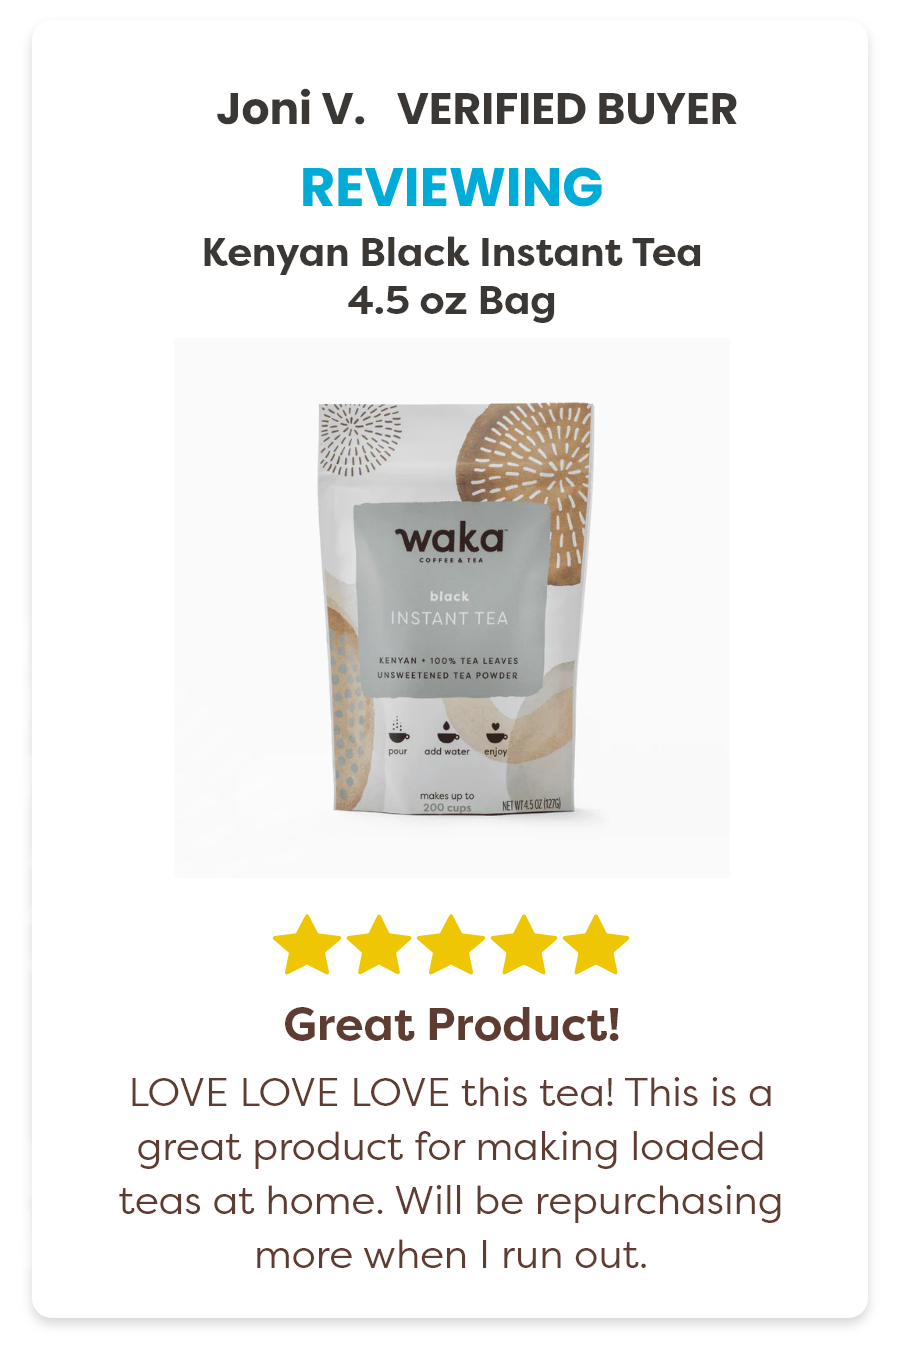 Joni V. Verified Buyer Reviewing the Kenyan Black Instant Tea 4.5 oz Bag 5 stars. Great Product! LOVE LOVE LOVE this tea! This is a great product for making loaded teas at home. Will be repurchasing more when I run out.